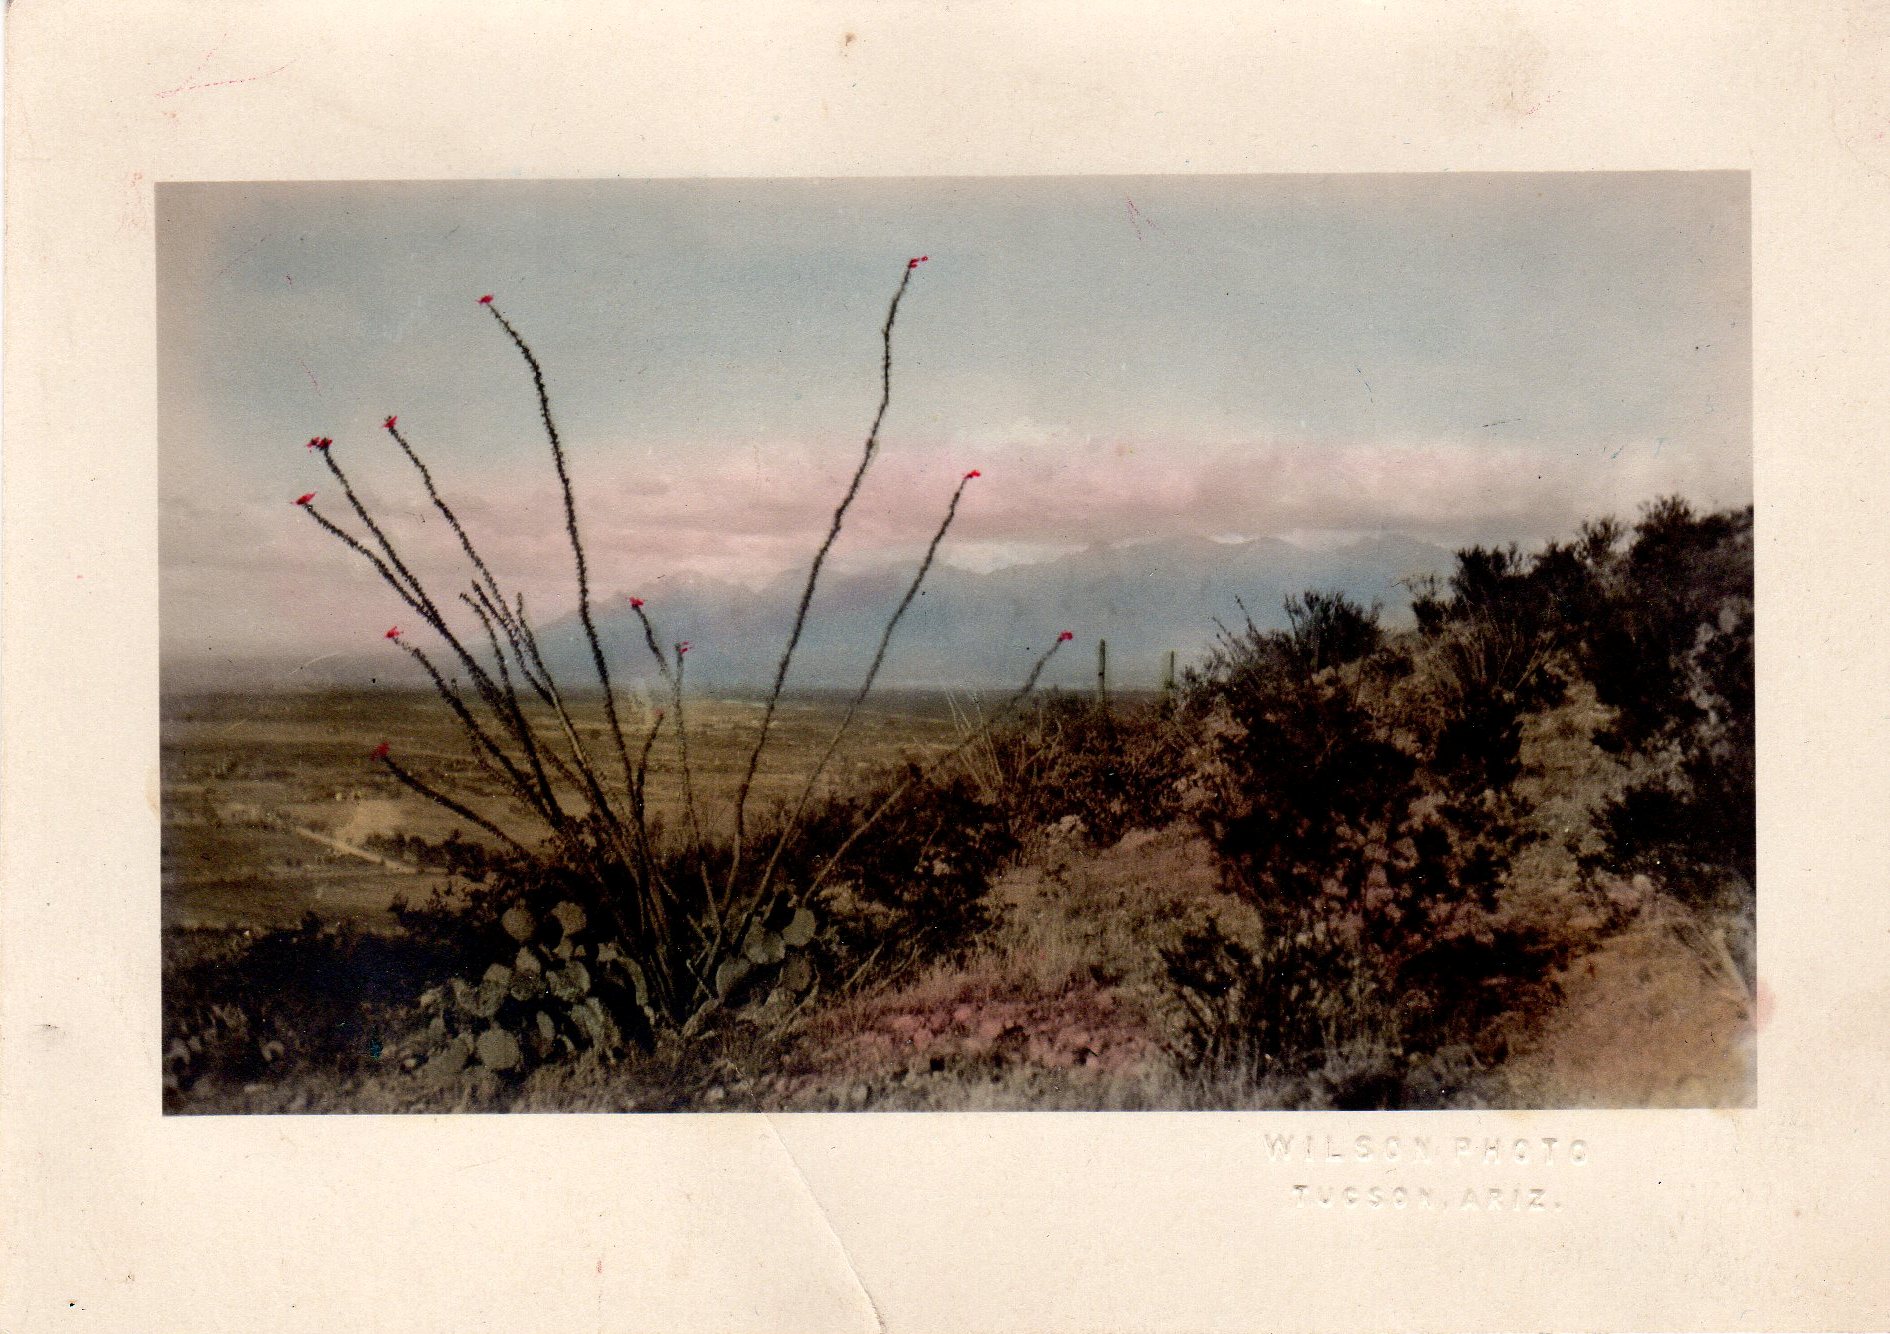 Hand tinted photo of vintage Tucson with Catalina Mountains in the background